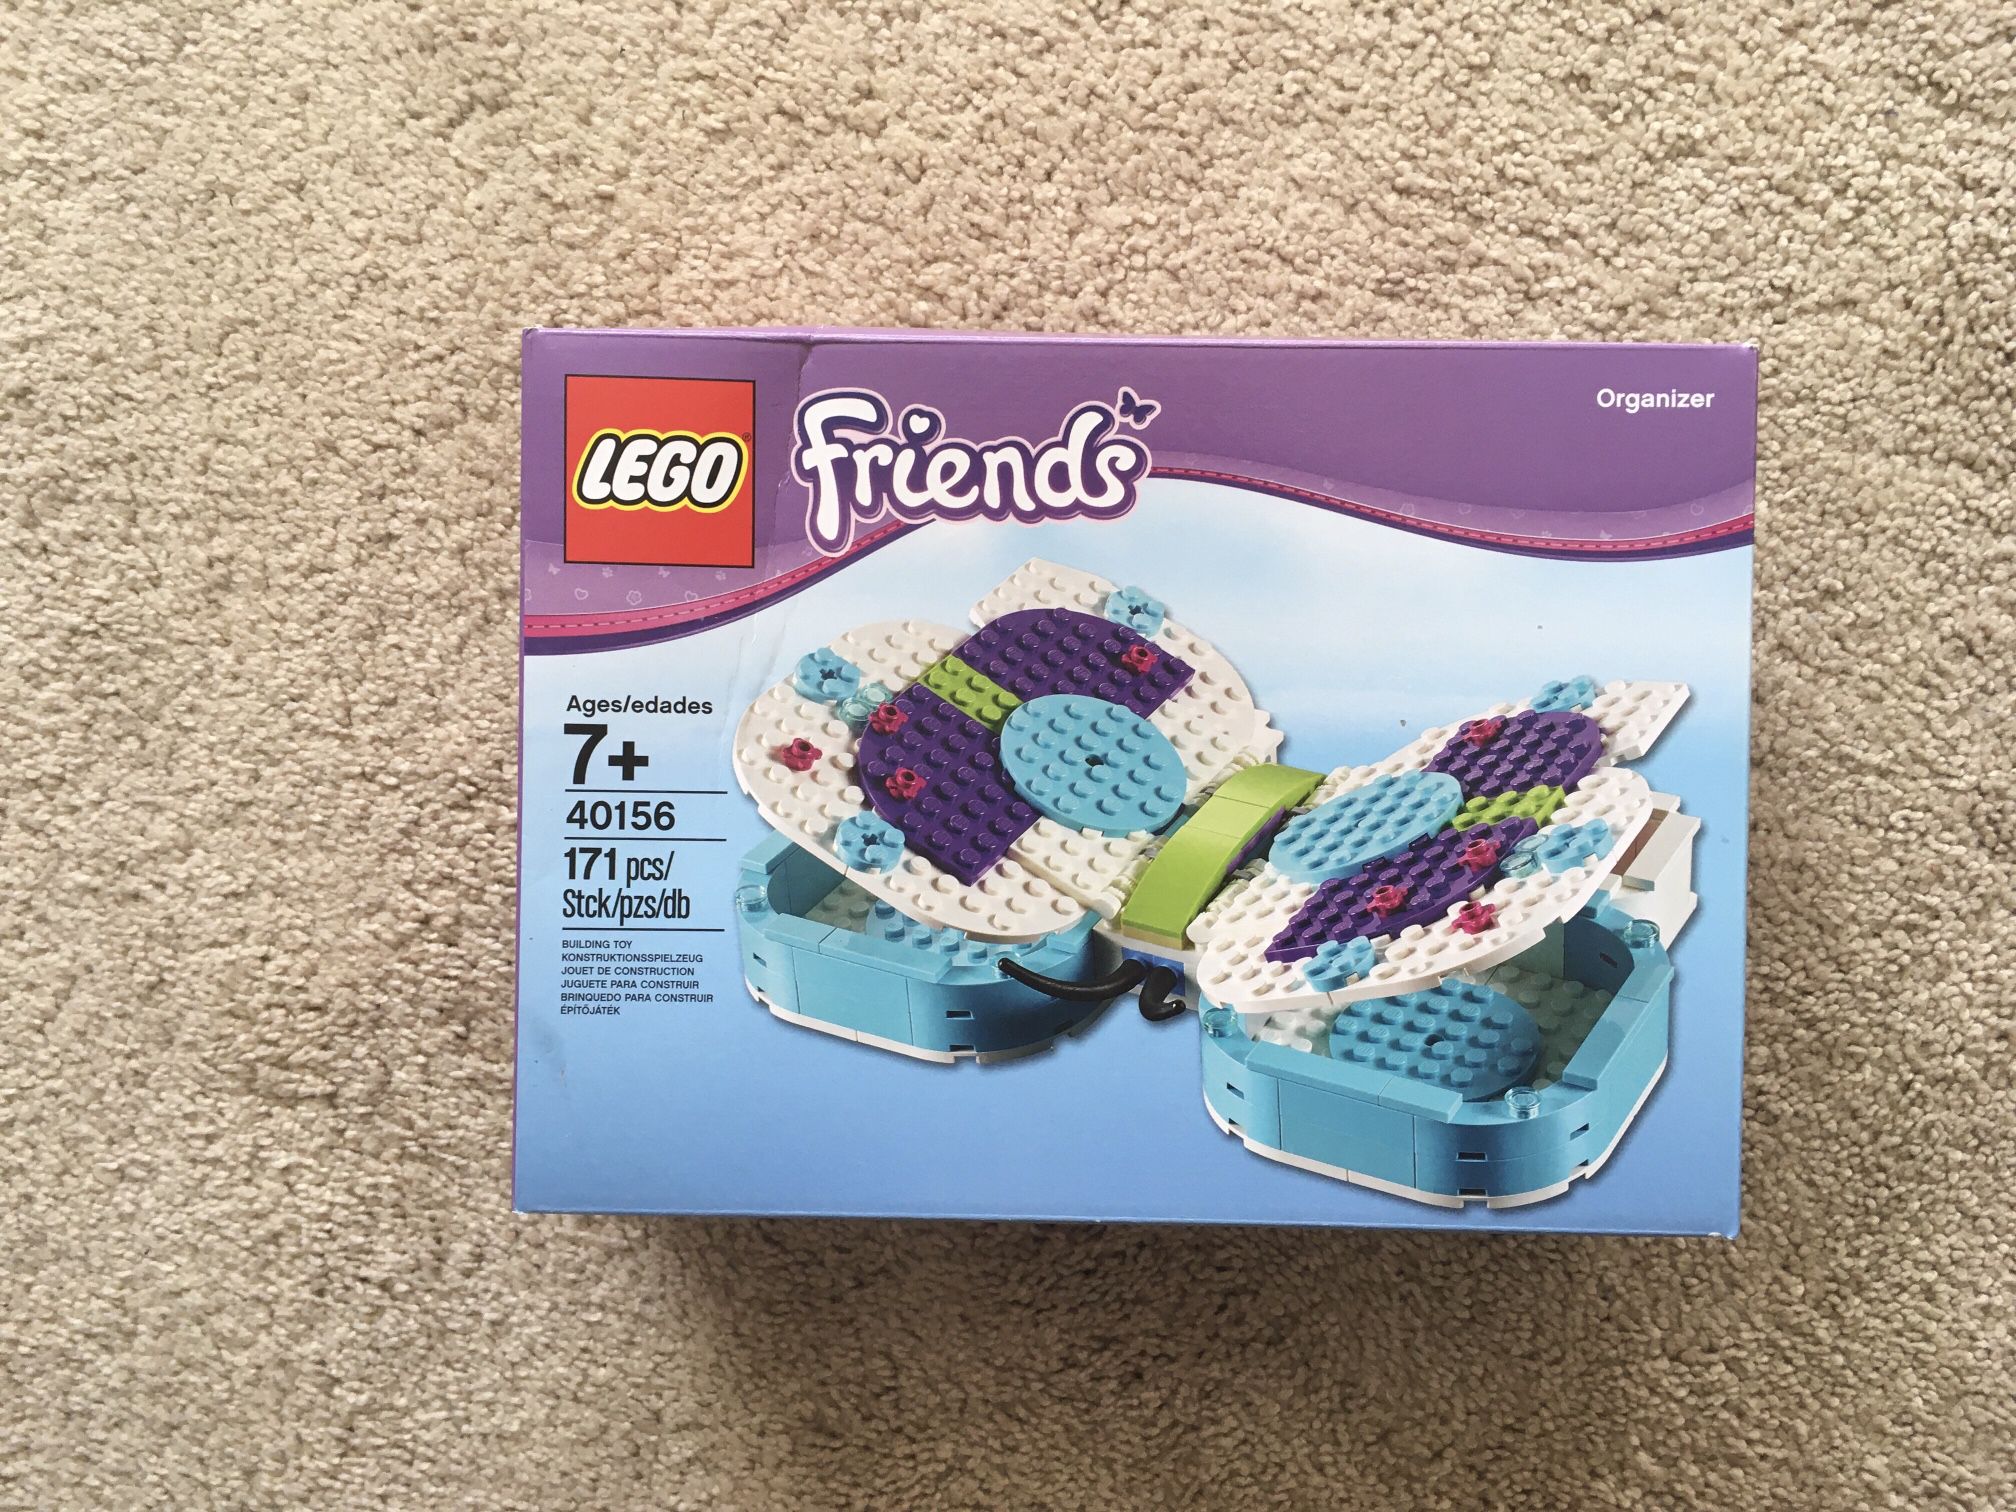 LEGO 40156 Butterfly Organizer Retired for Mountain View, CA OfferUp